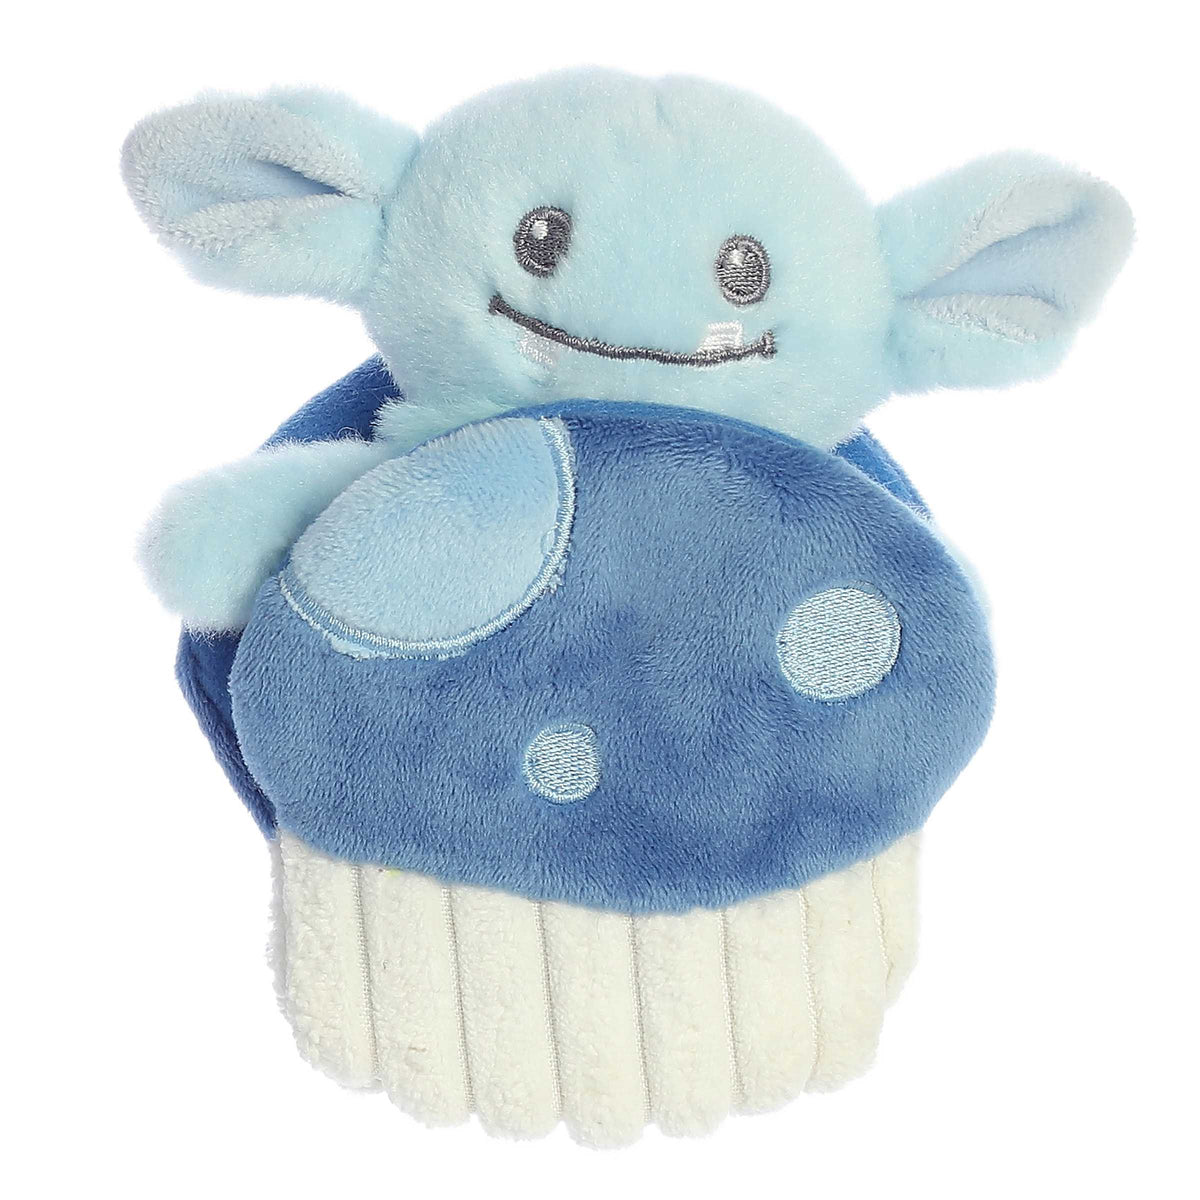 Interactive mini blue Goblin plush rattle toy with smiling face sitting inside a crinkly blue and white mushroom pocket